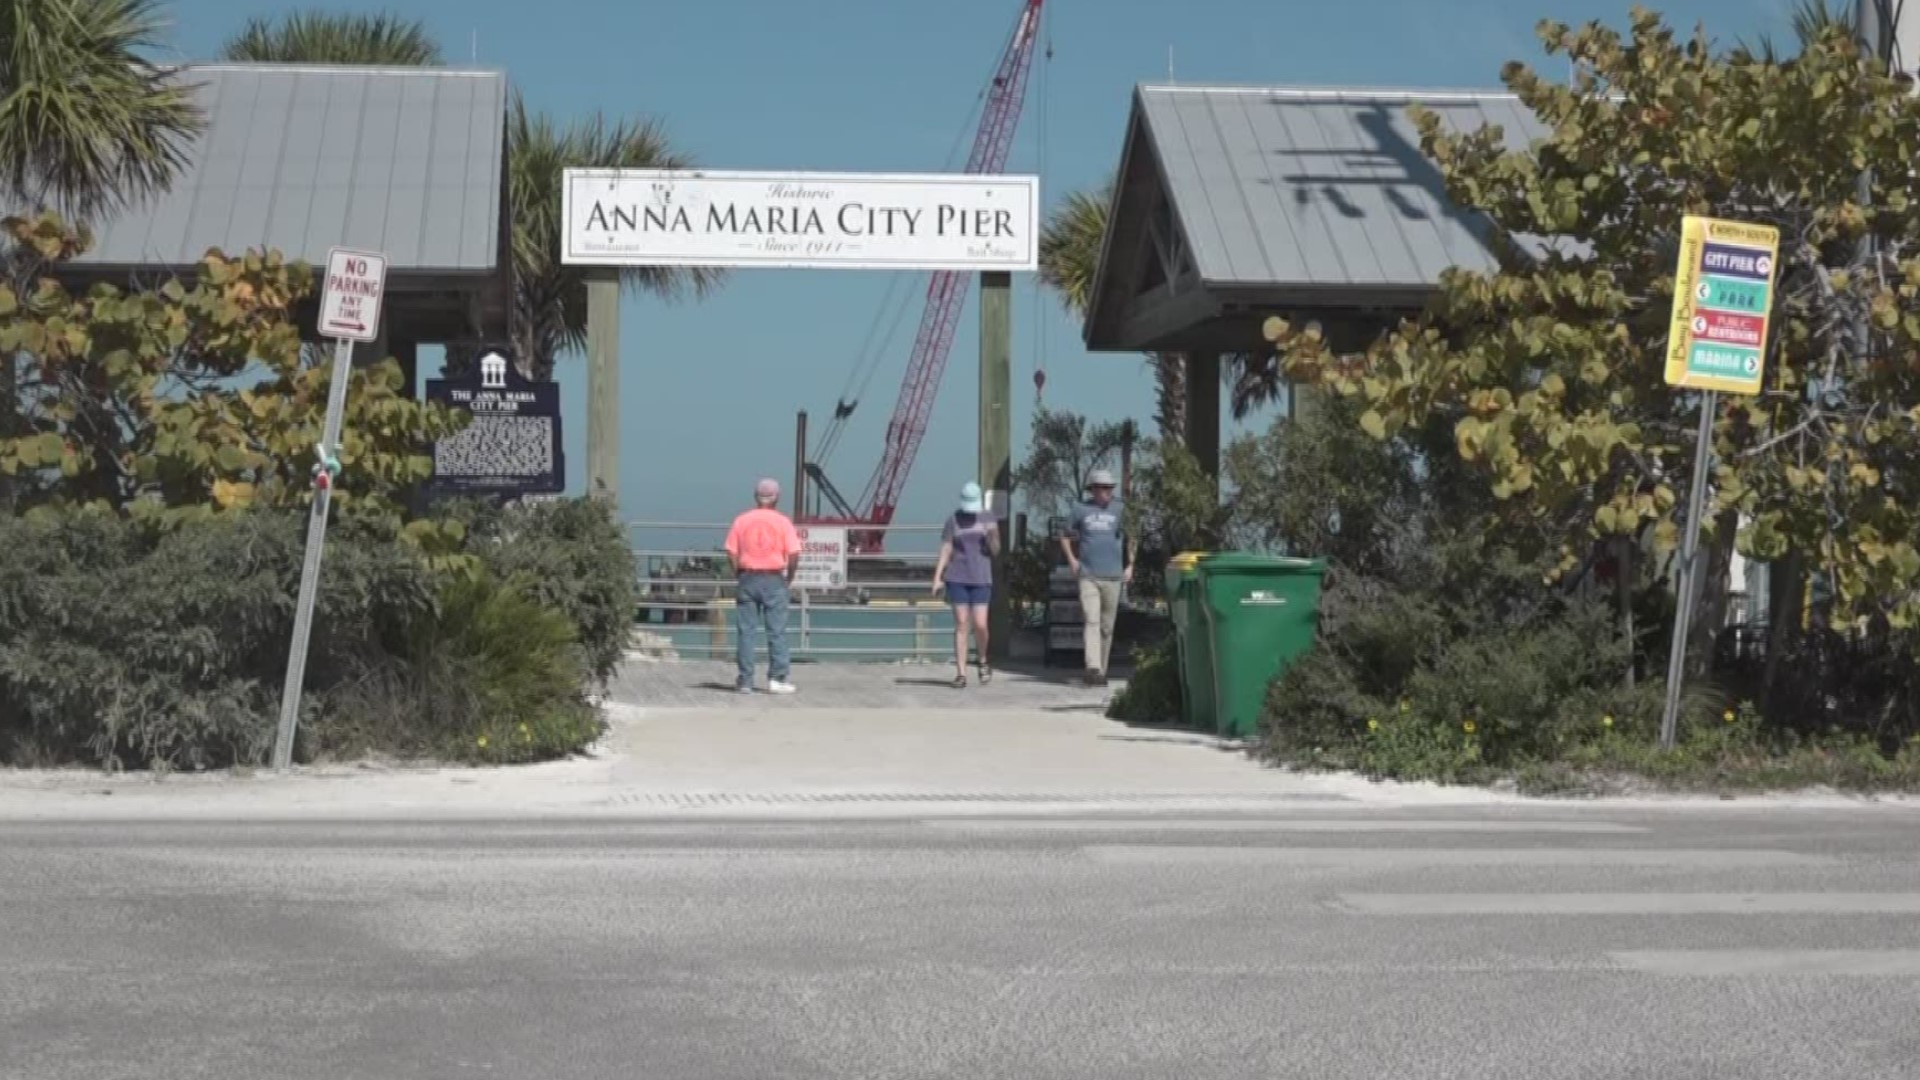 It's been a landmark on Anna Maria Island for more than a century, then Hurricane Irma came through.